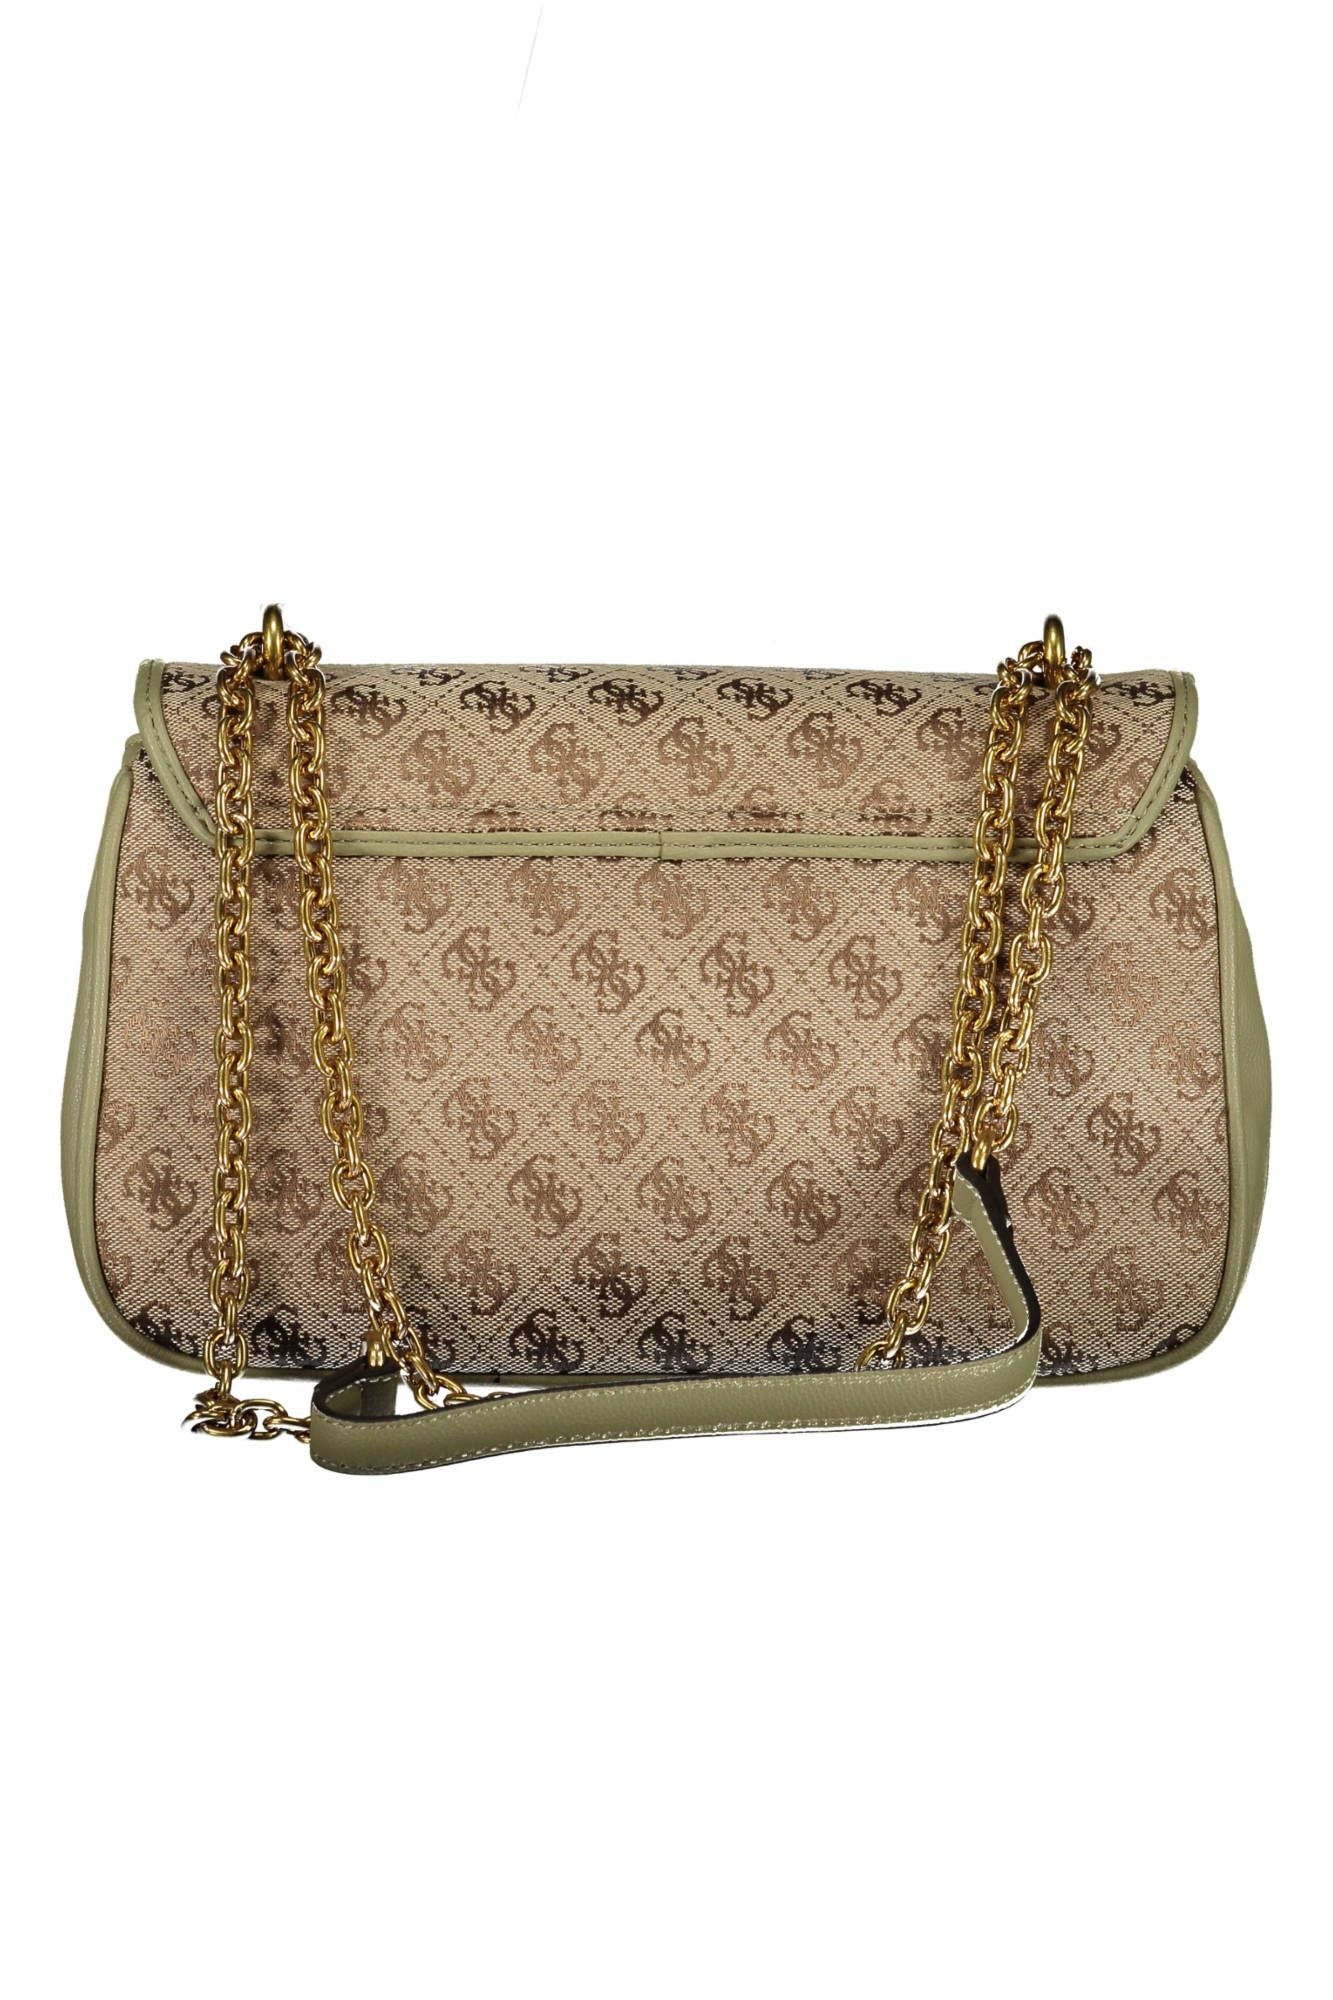 Guess Jeans Chic Green Chain-Trim Shoulder Bag